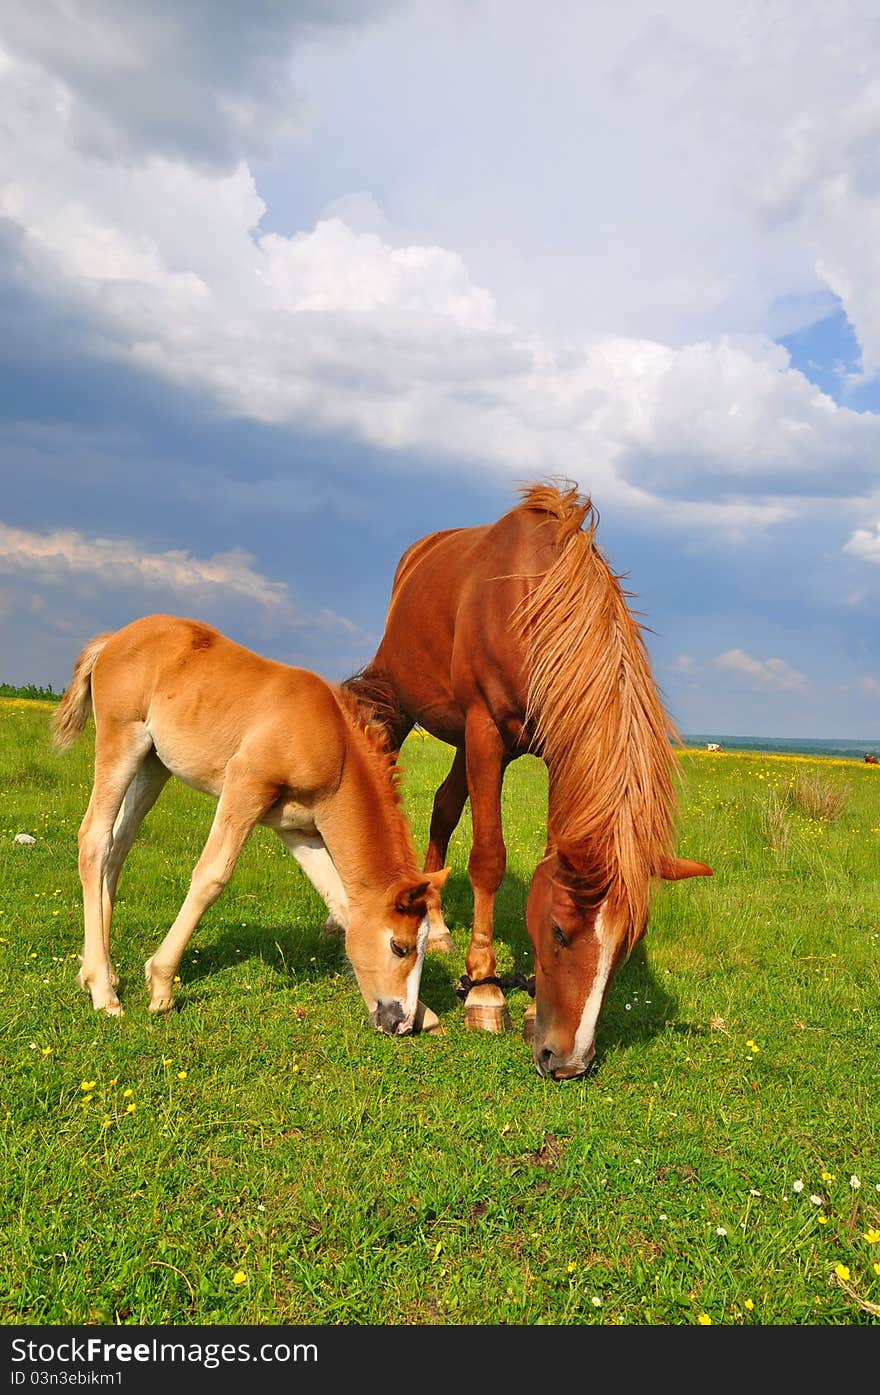 A foal with a mare on a summer pasture in a rural landscape. A foal with a mare on a summer pasture in a rural landscape